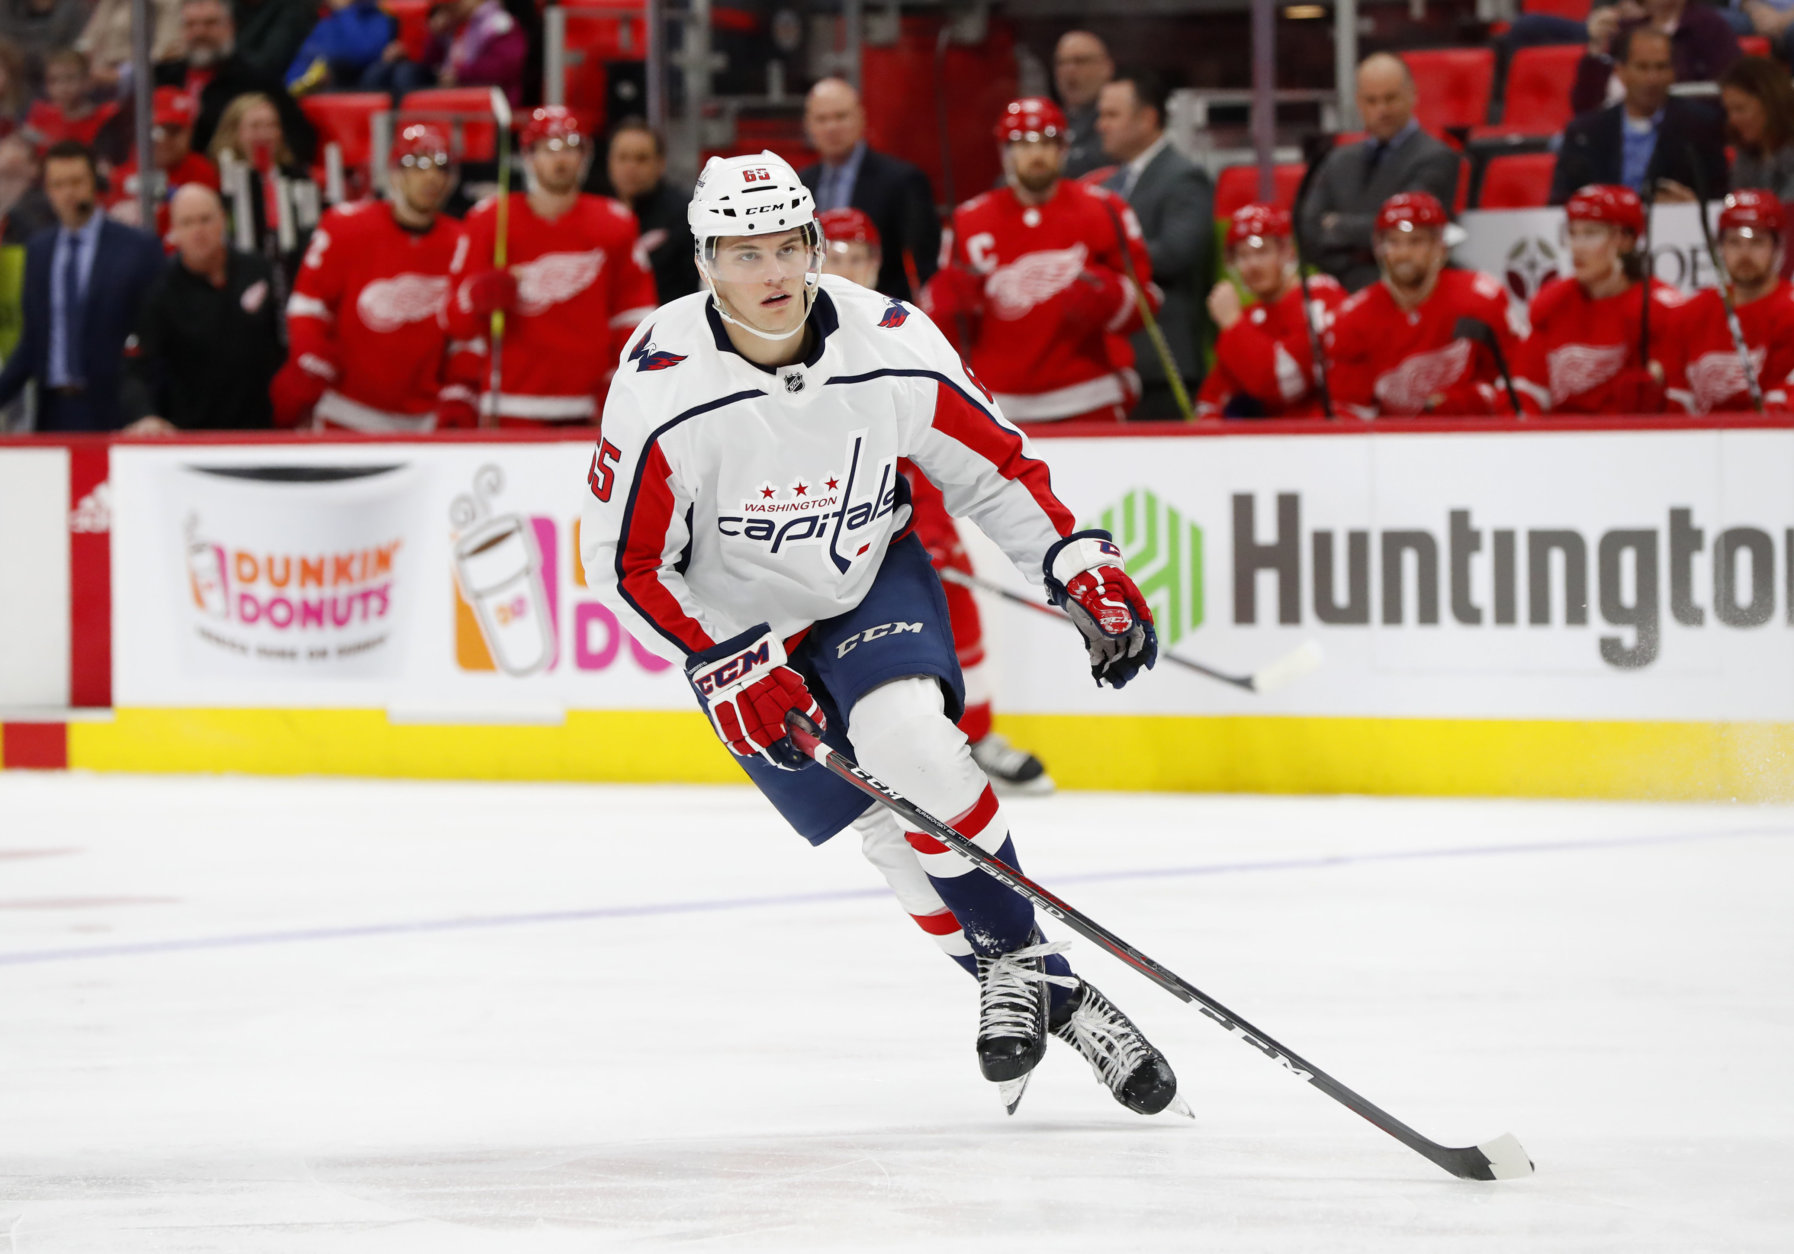 Washington Capitals left wing Andre Burakovsky (65) skates against the Detroit Red Wings in the first period of an NHL hockey game Thursday, March 22, 2018, in Detroit. (AP Photo/Paul Sancya)